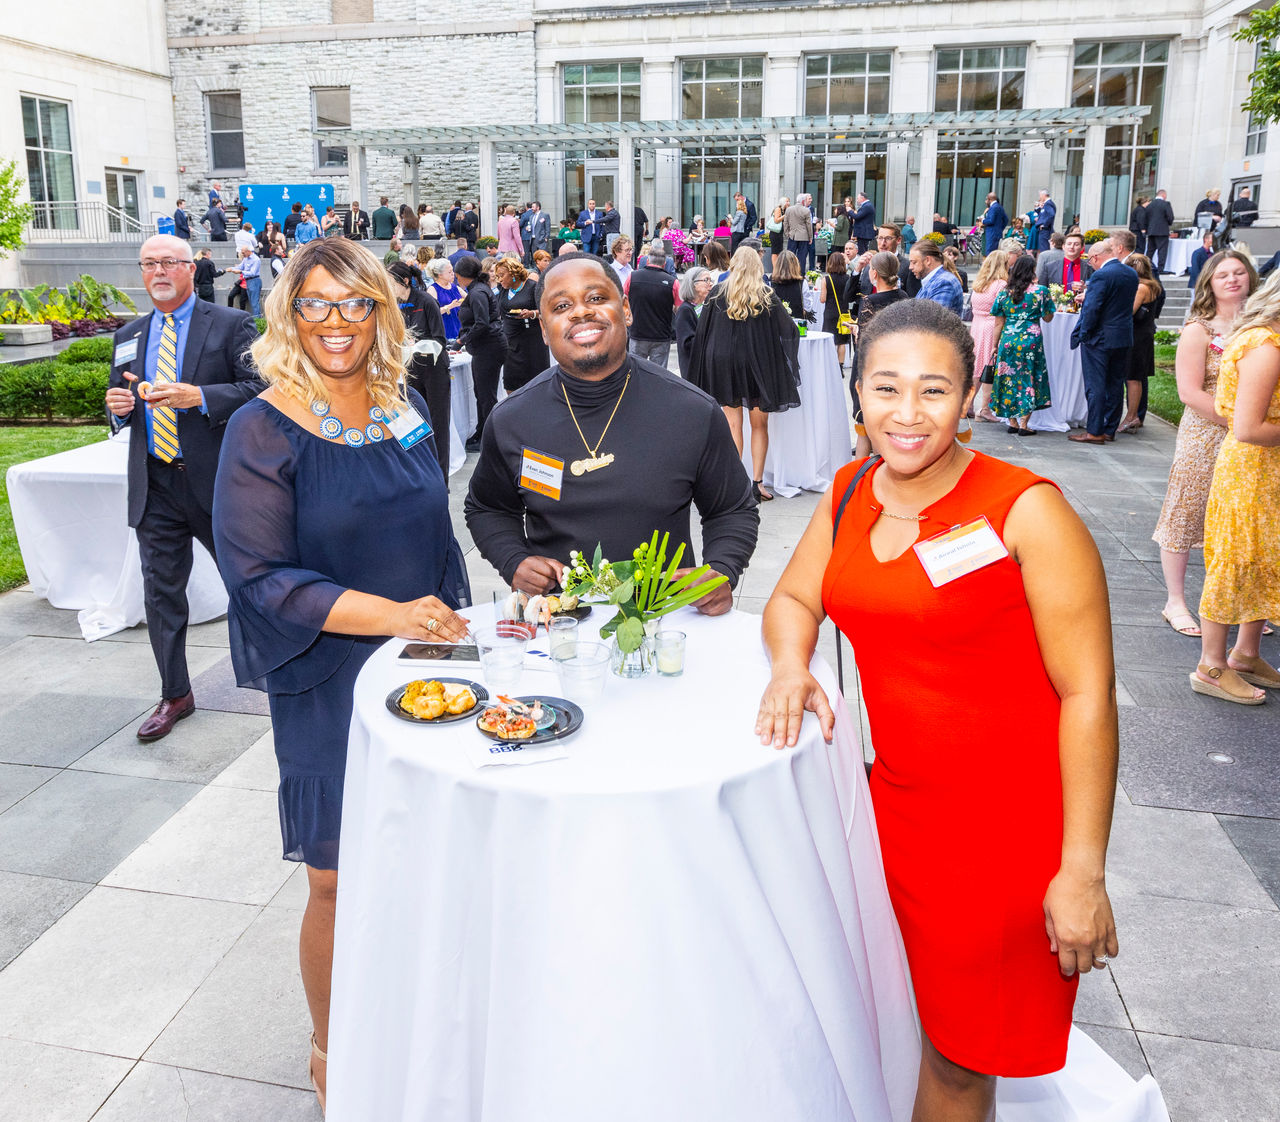 From left to right: BBB Board Member Kim Richards enjoying hors d'oeuvres in the courtyard with 2022 Spark Awards Winners and 2023 Spark Awards Judges Evan Johnson of Timeless Recording Studio and Aireal Ishola of Keystone Pediatric Therapy.